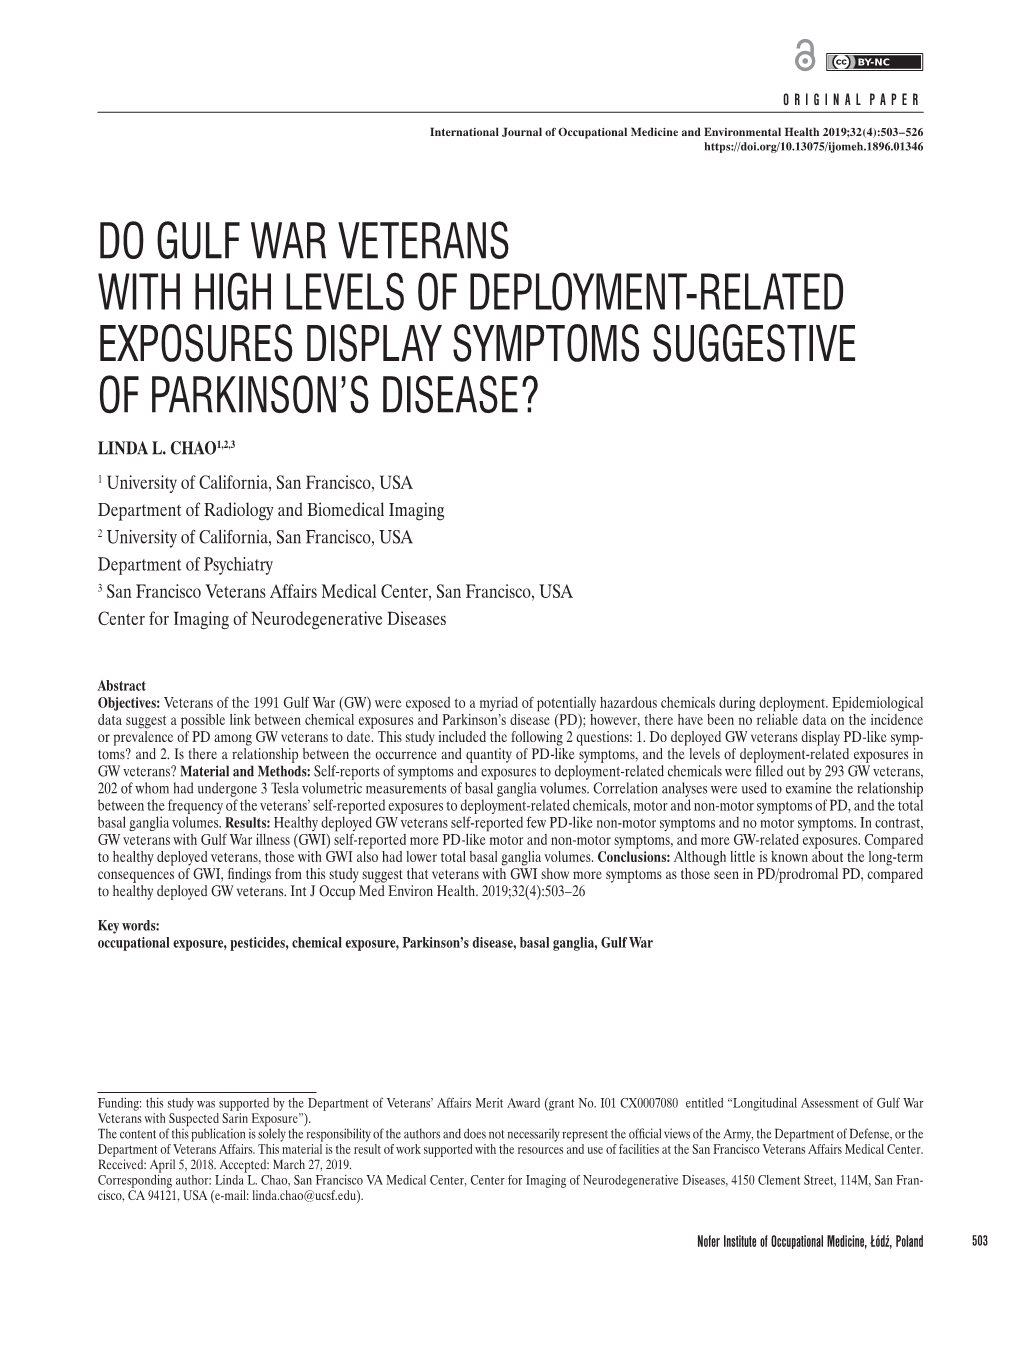 Do Gulf War Veterans with High Levels of Deployment-Related Exposures Display Symptoms Suggestive of Parkinson’S Disease? Linda L